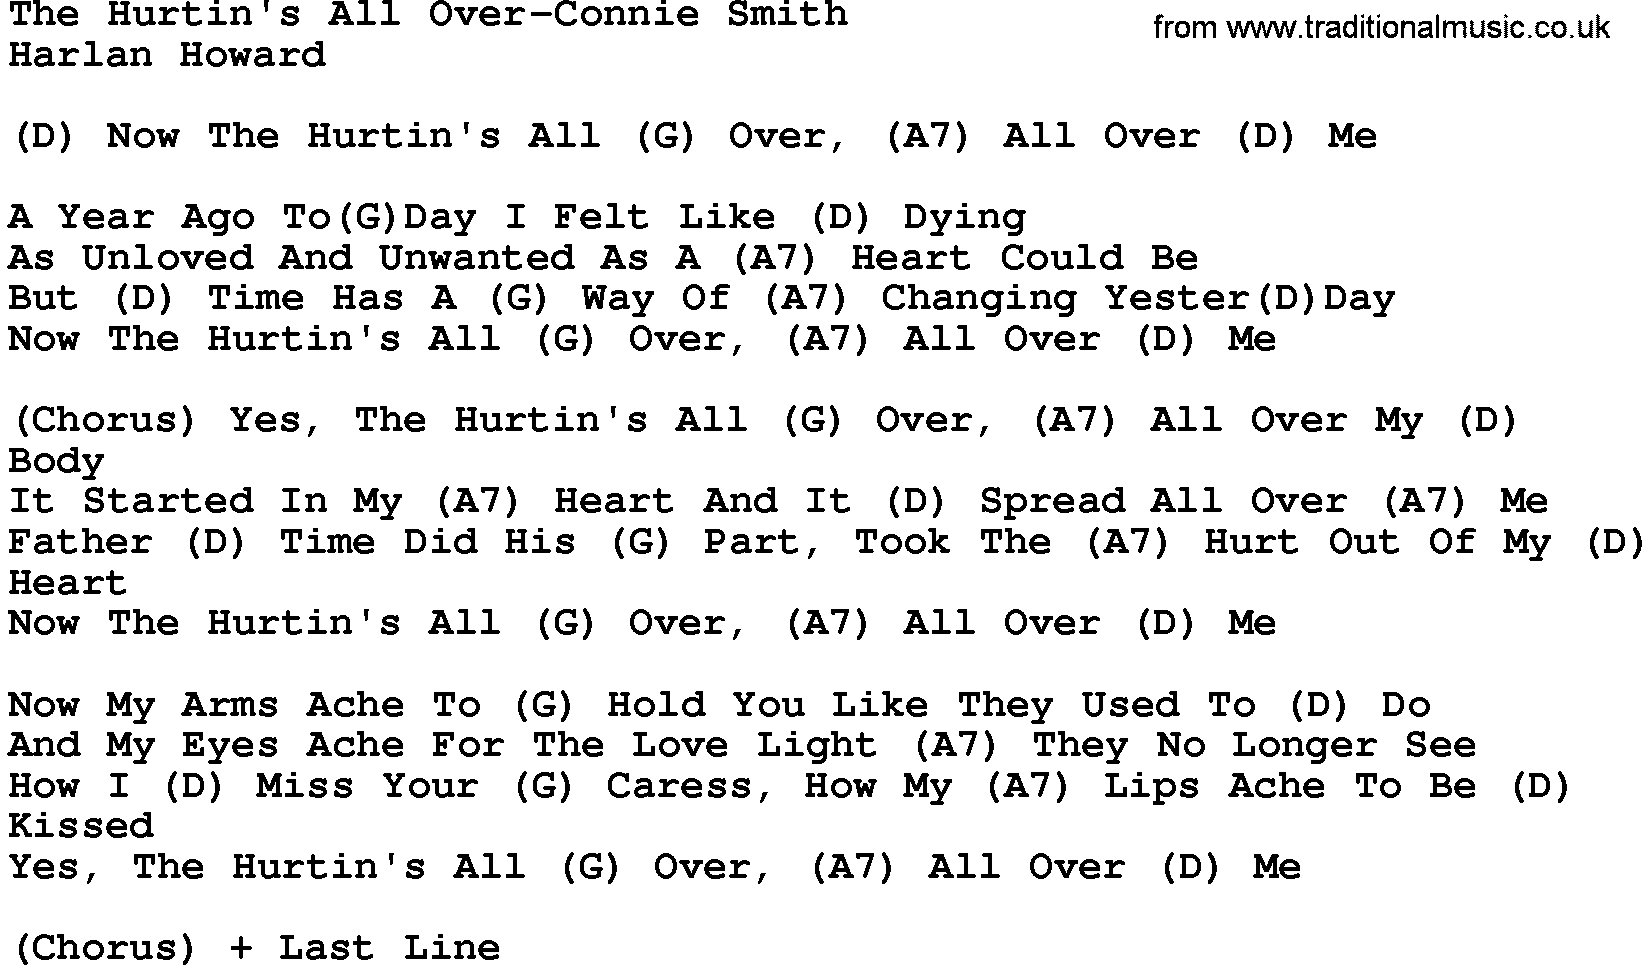 Country music song: The Hurtin's All Over-Connie Smith lyrics and chords